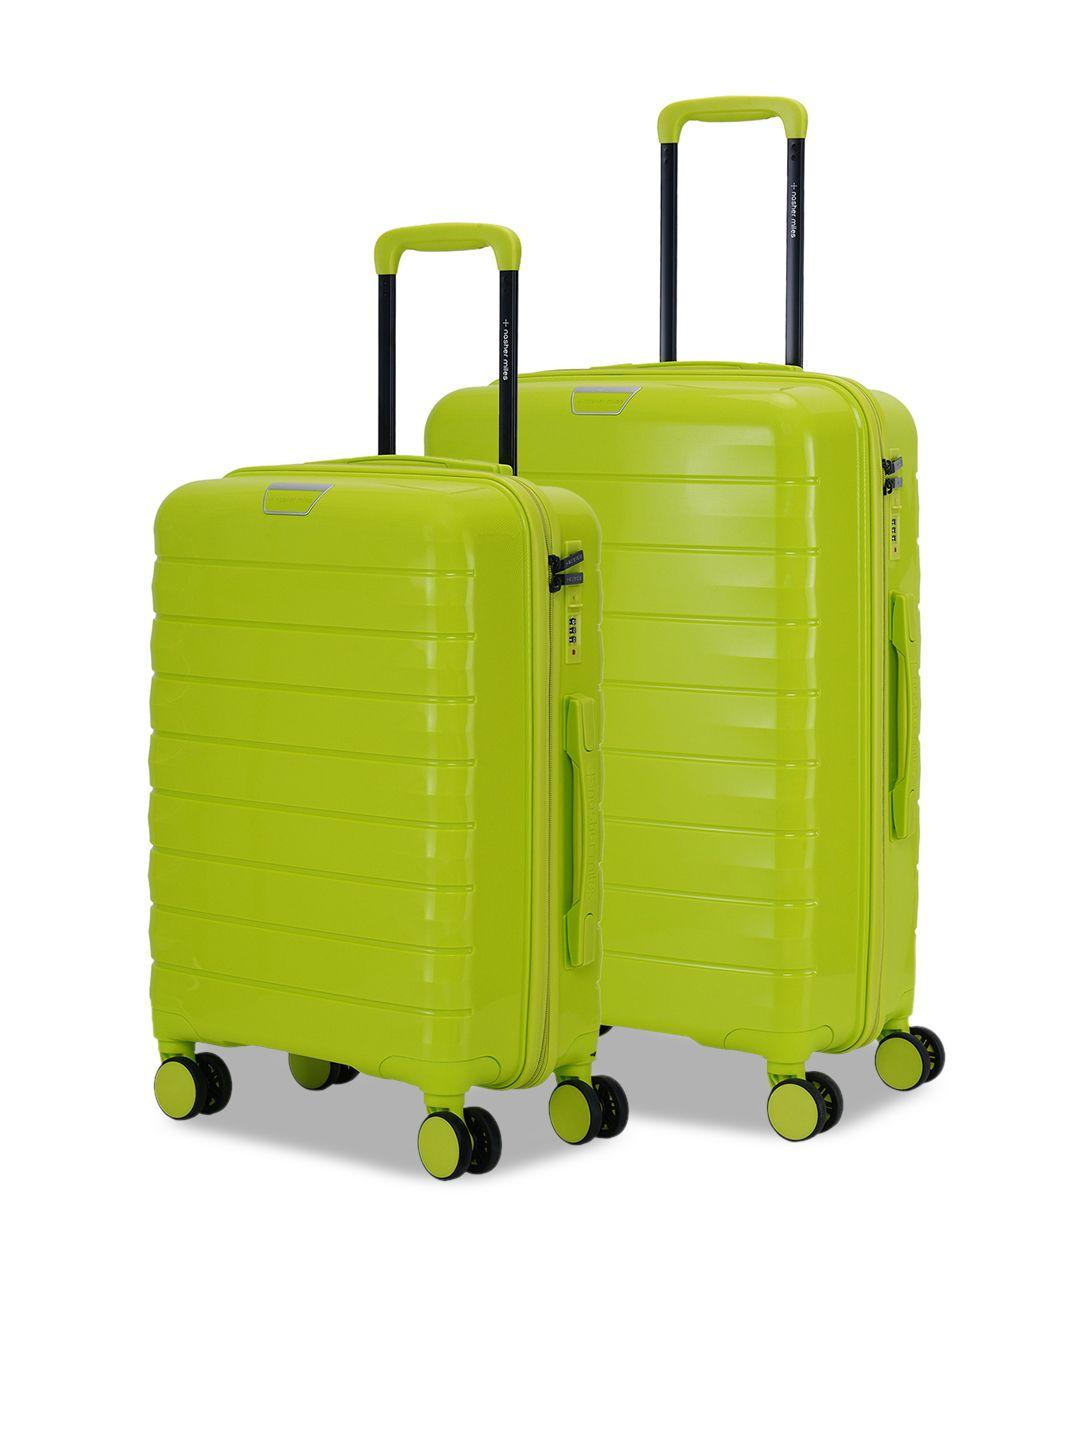 nasher miles vienna set of 2 water resistance hard-sided trolley suitcase